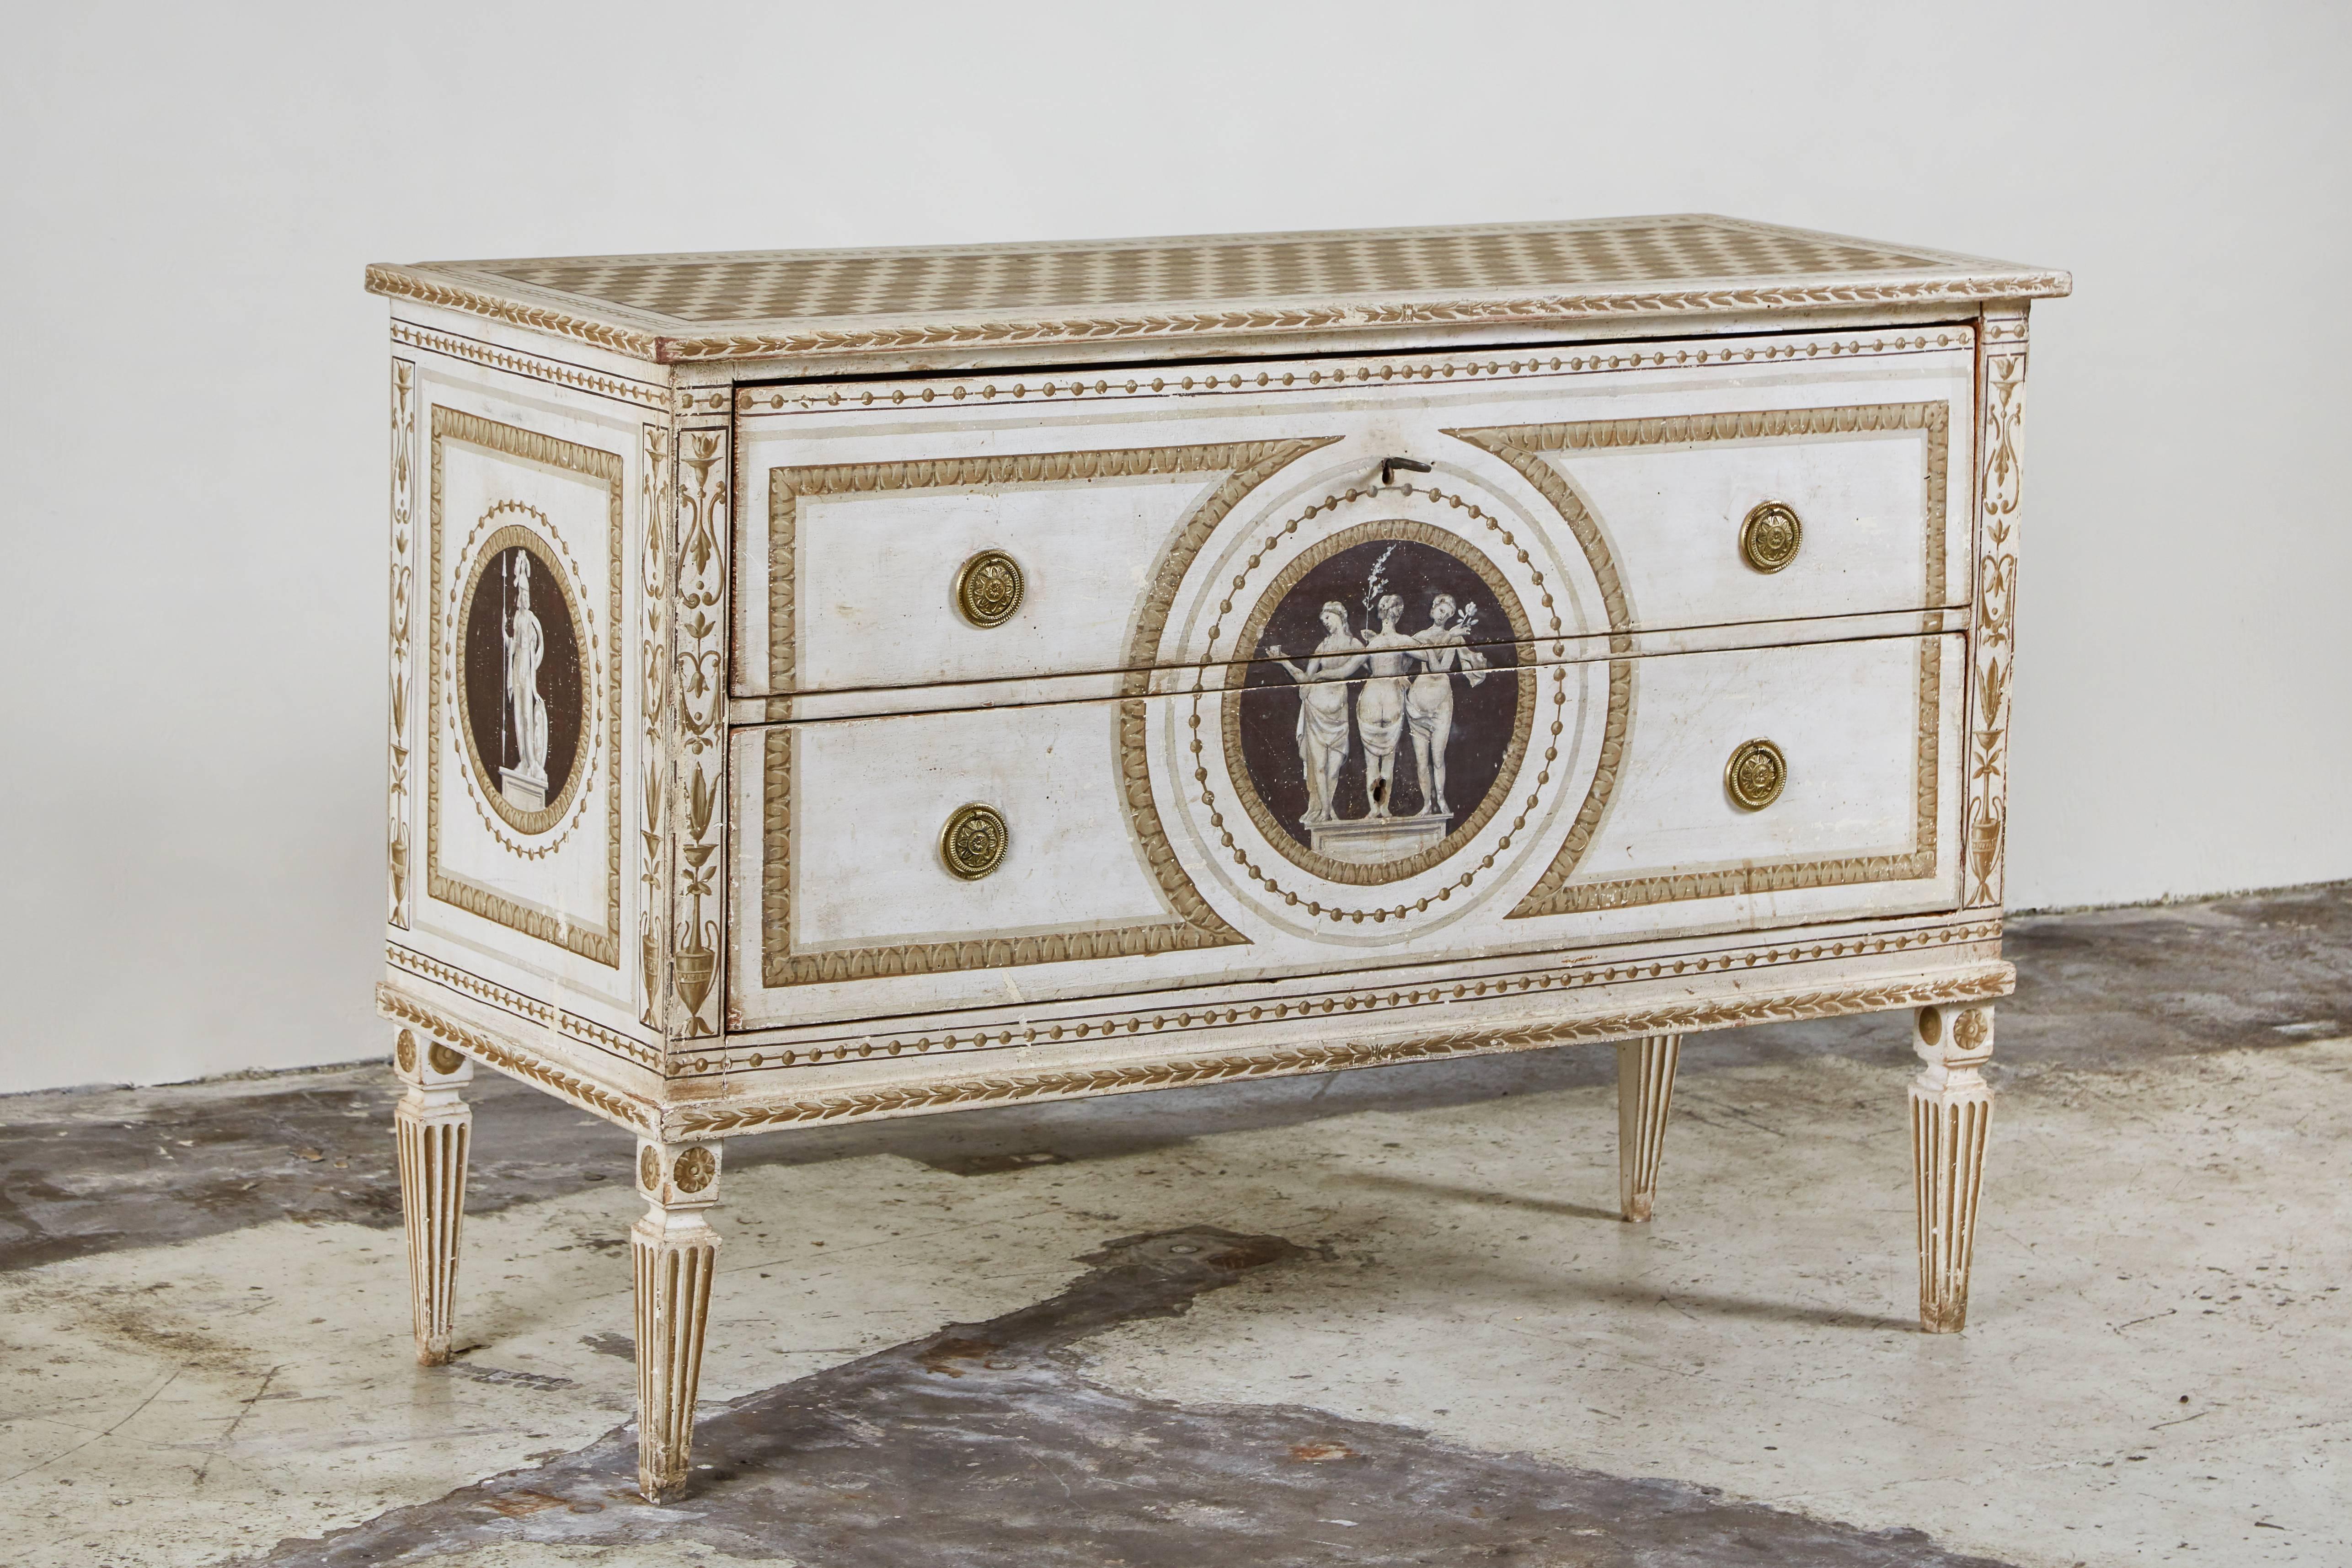 Elegant, circa 1870, two-drawer commode on tapered, fluted legs with striking, hand painting that dates to the 1920s. Embellishments include a stunning, central medallion depicting the Three Graces of Greek mythology and a faux-tiled top.